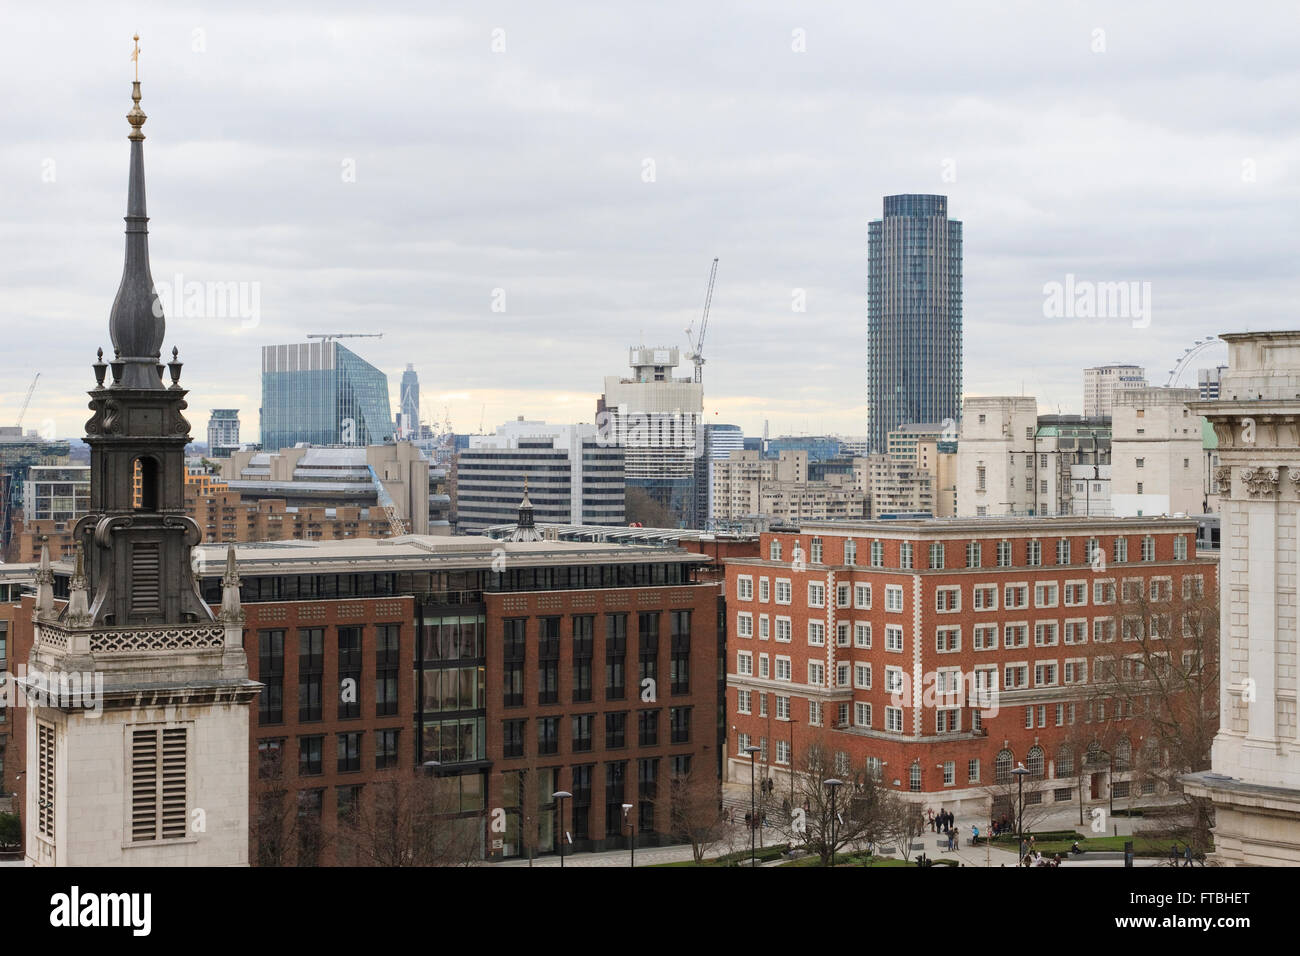 View from the roof top of One New Change in London, England. Stock Photo